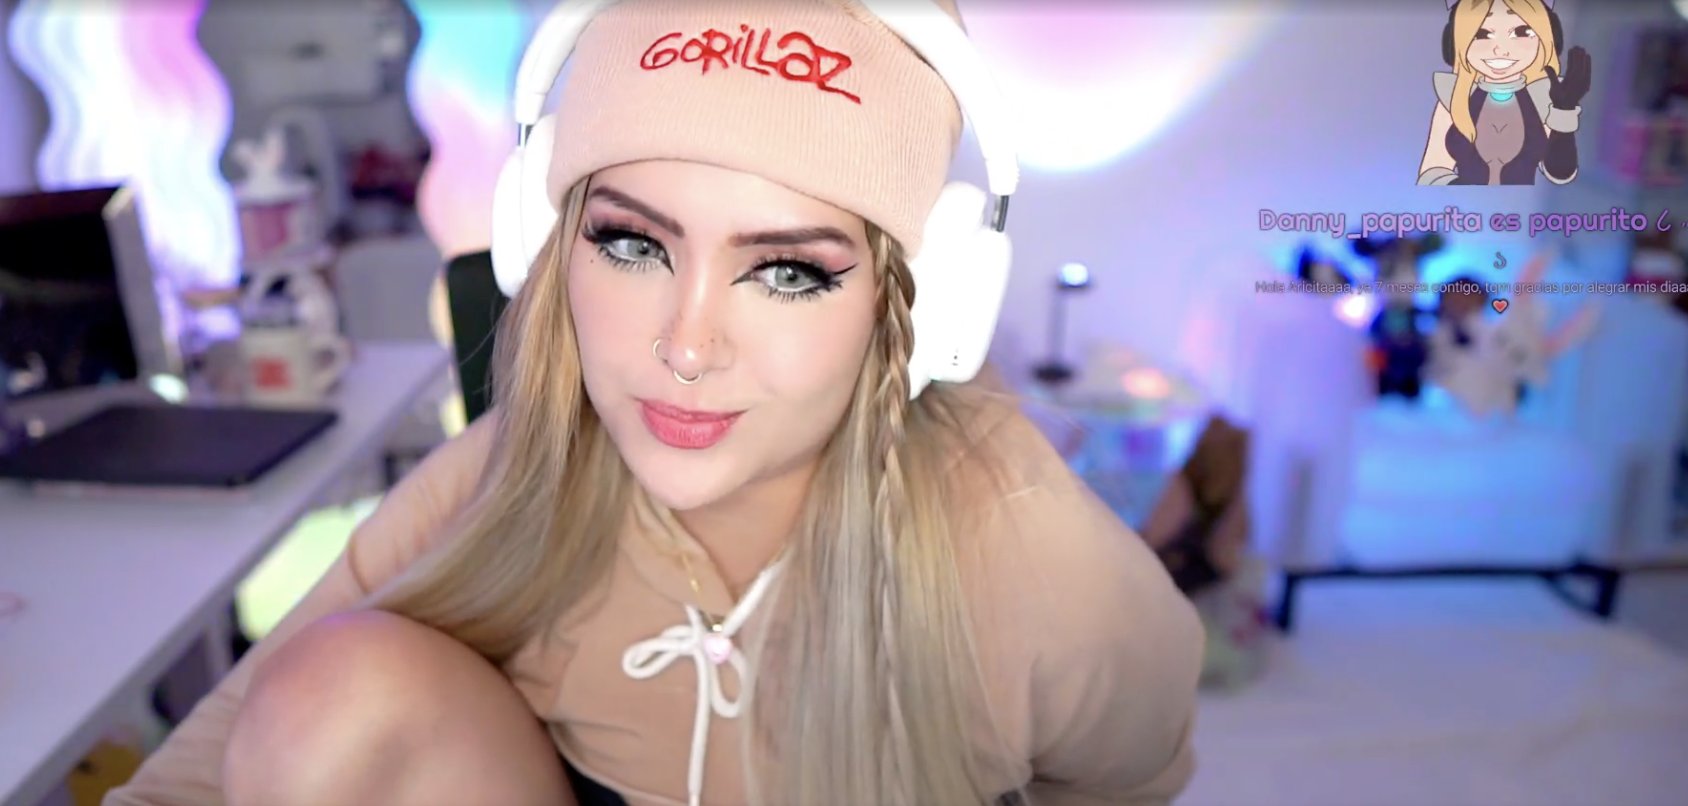 Most-watched female Twitch streamers in 2022: Amouranth dominates, VTubers  rise up - Dexerto